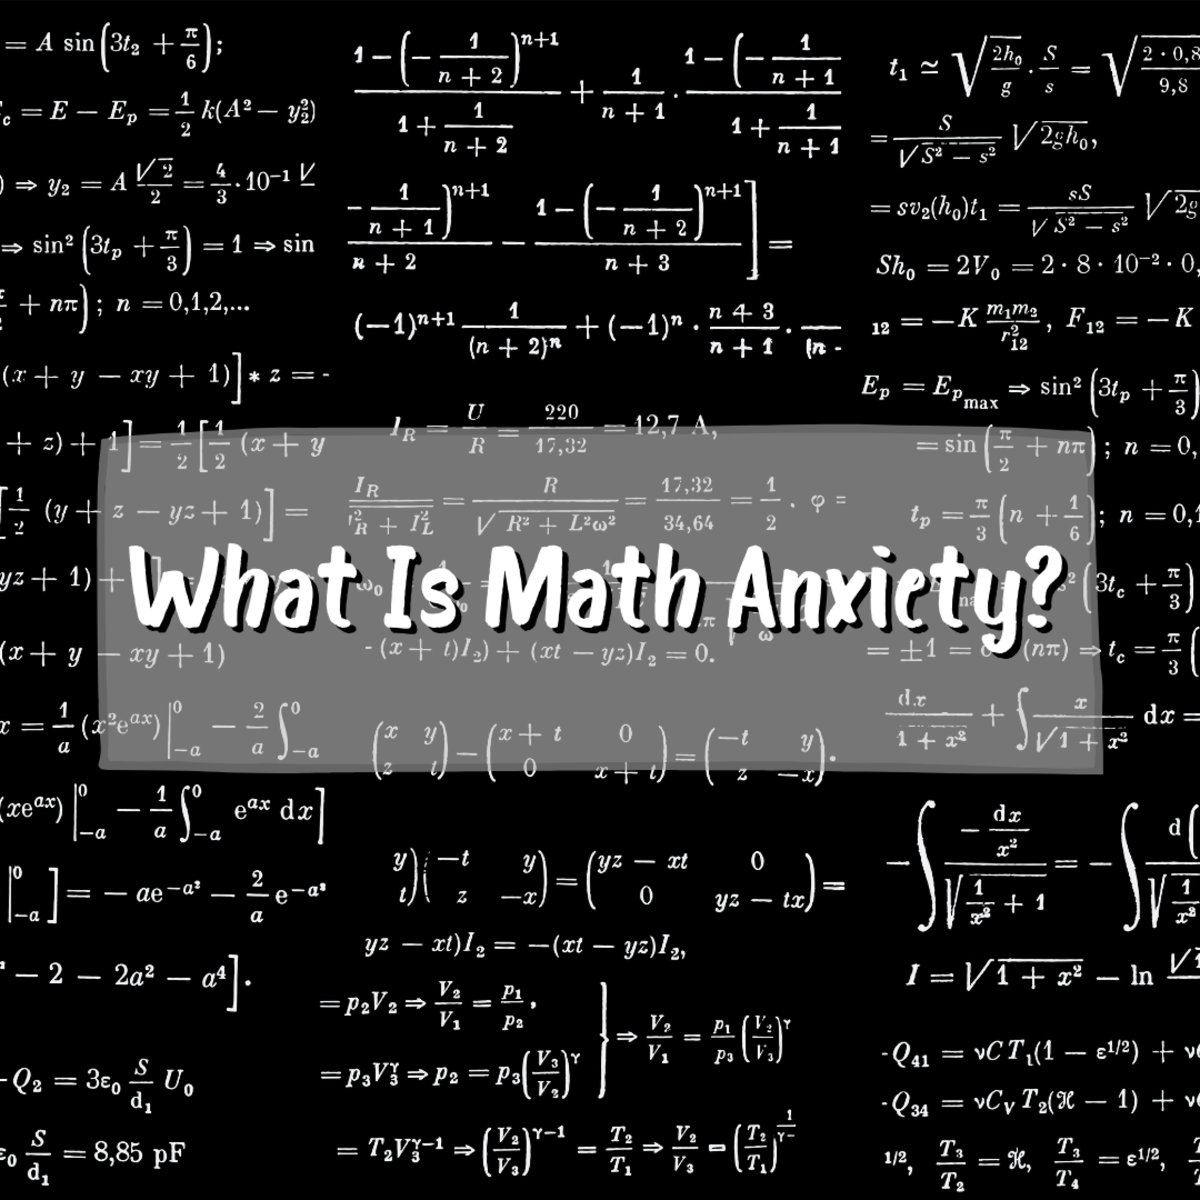 Read on to better understand math anxiety and where it comes from. You'll also discover some math myths and some helpful ways to lessen math-related fears and stress.